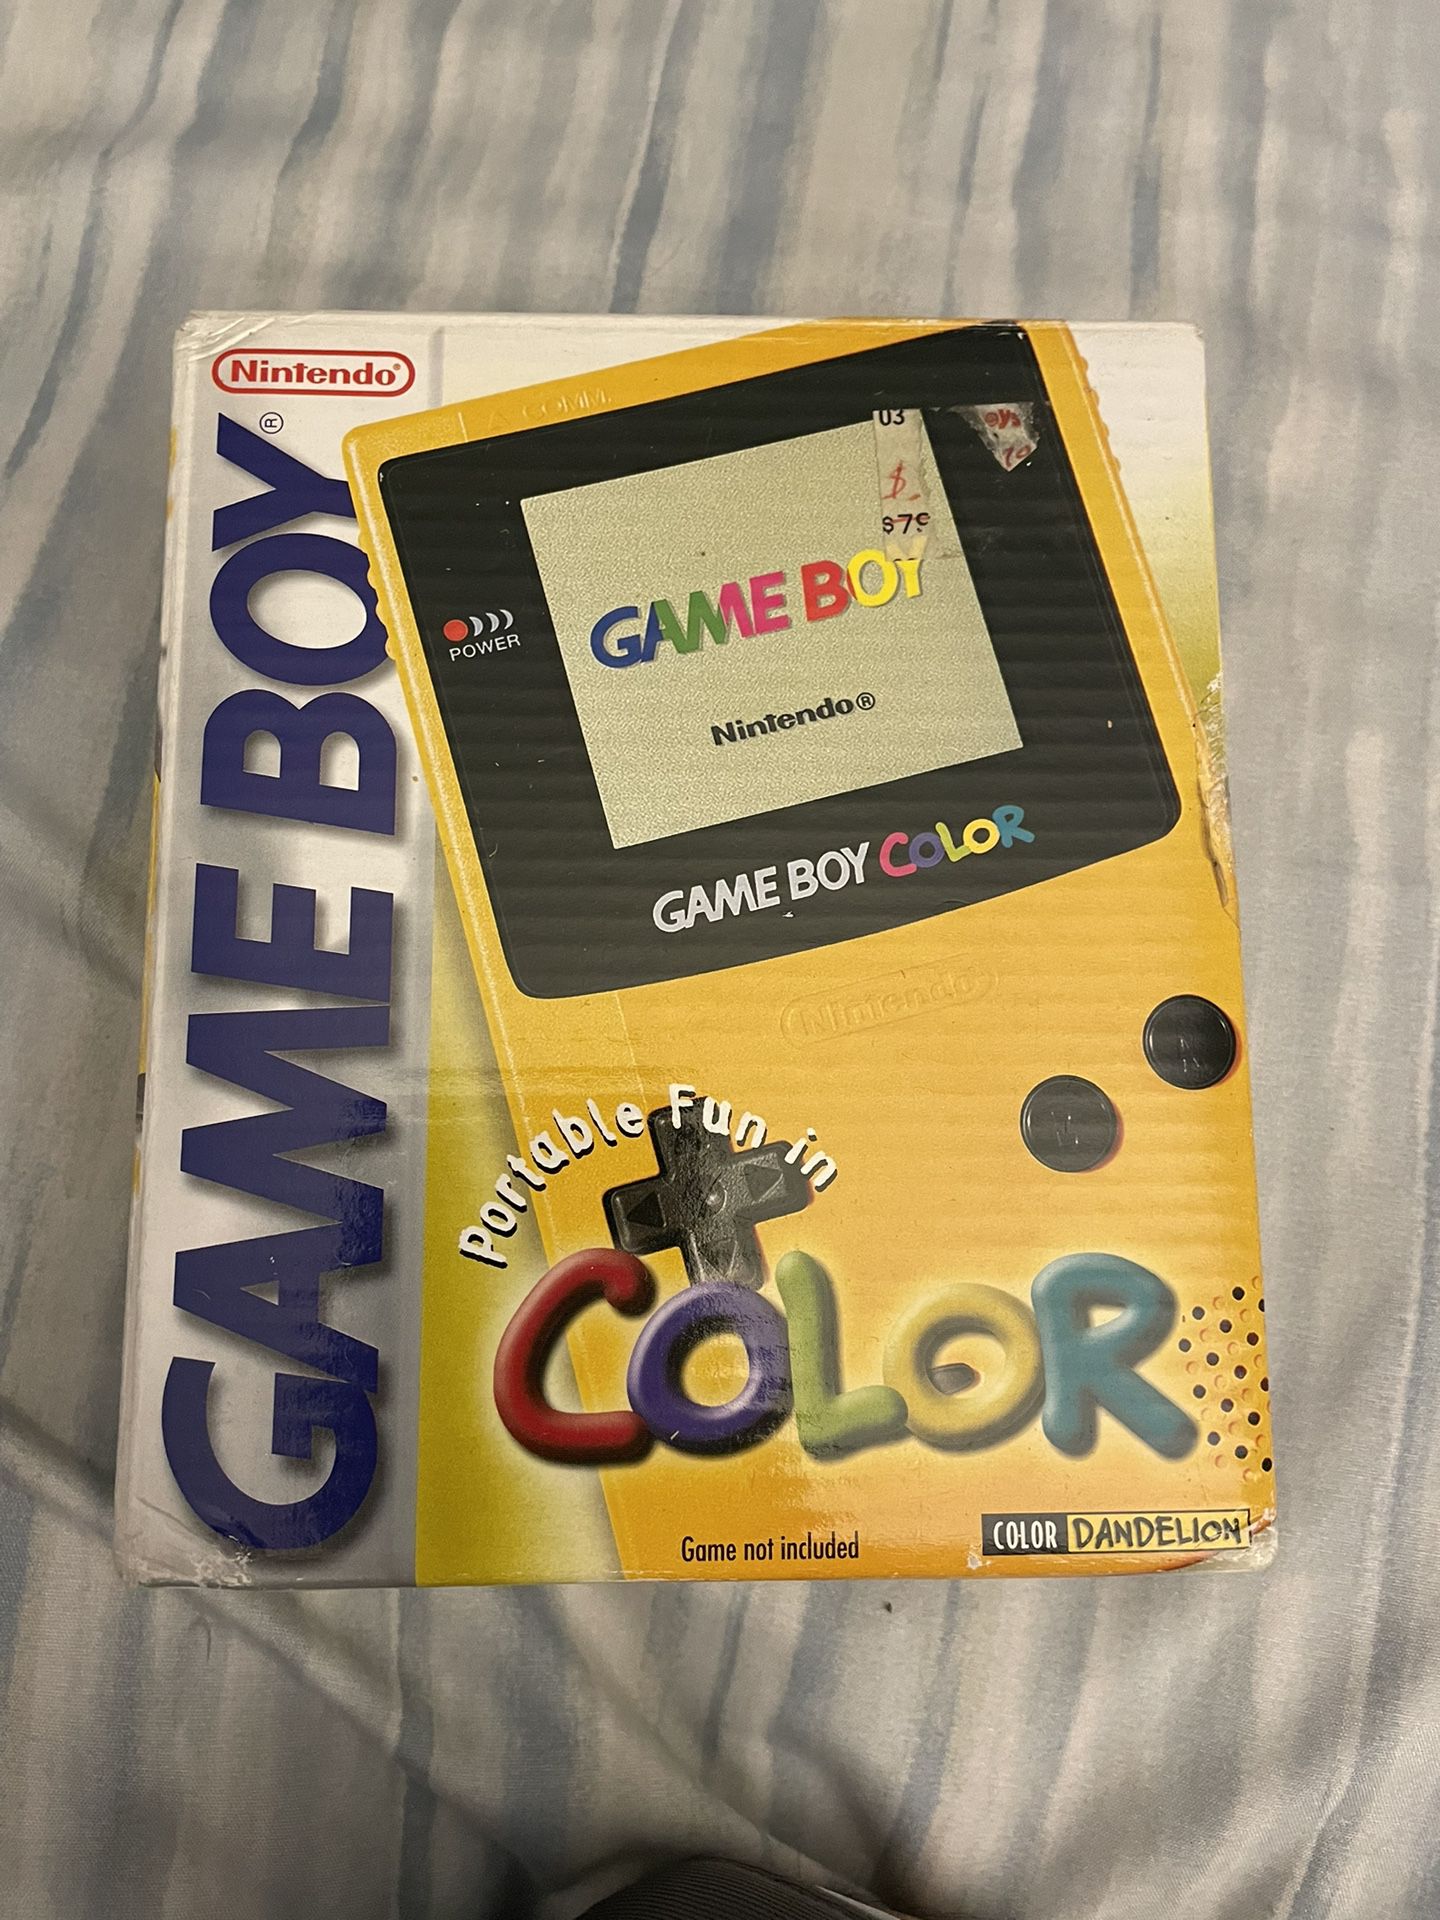 Gameboy Color Handheld Dandelion Yellow System In Box With All Manuals 